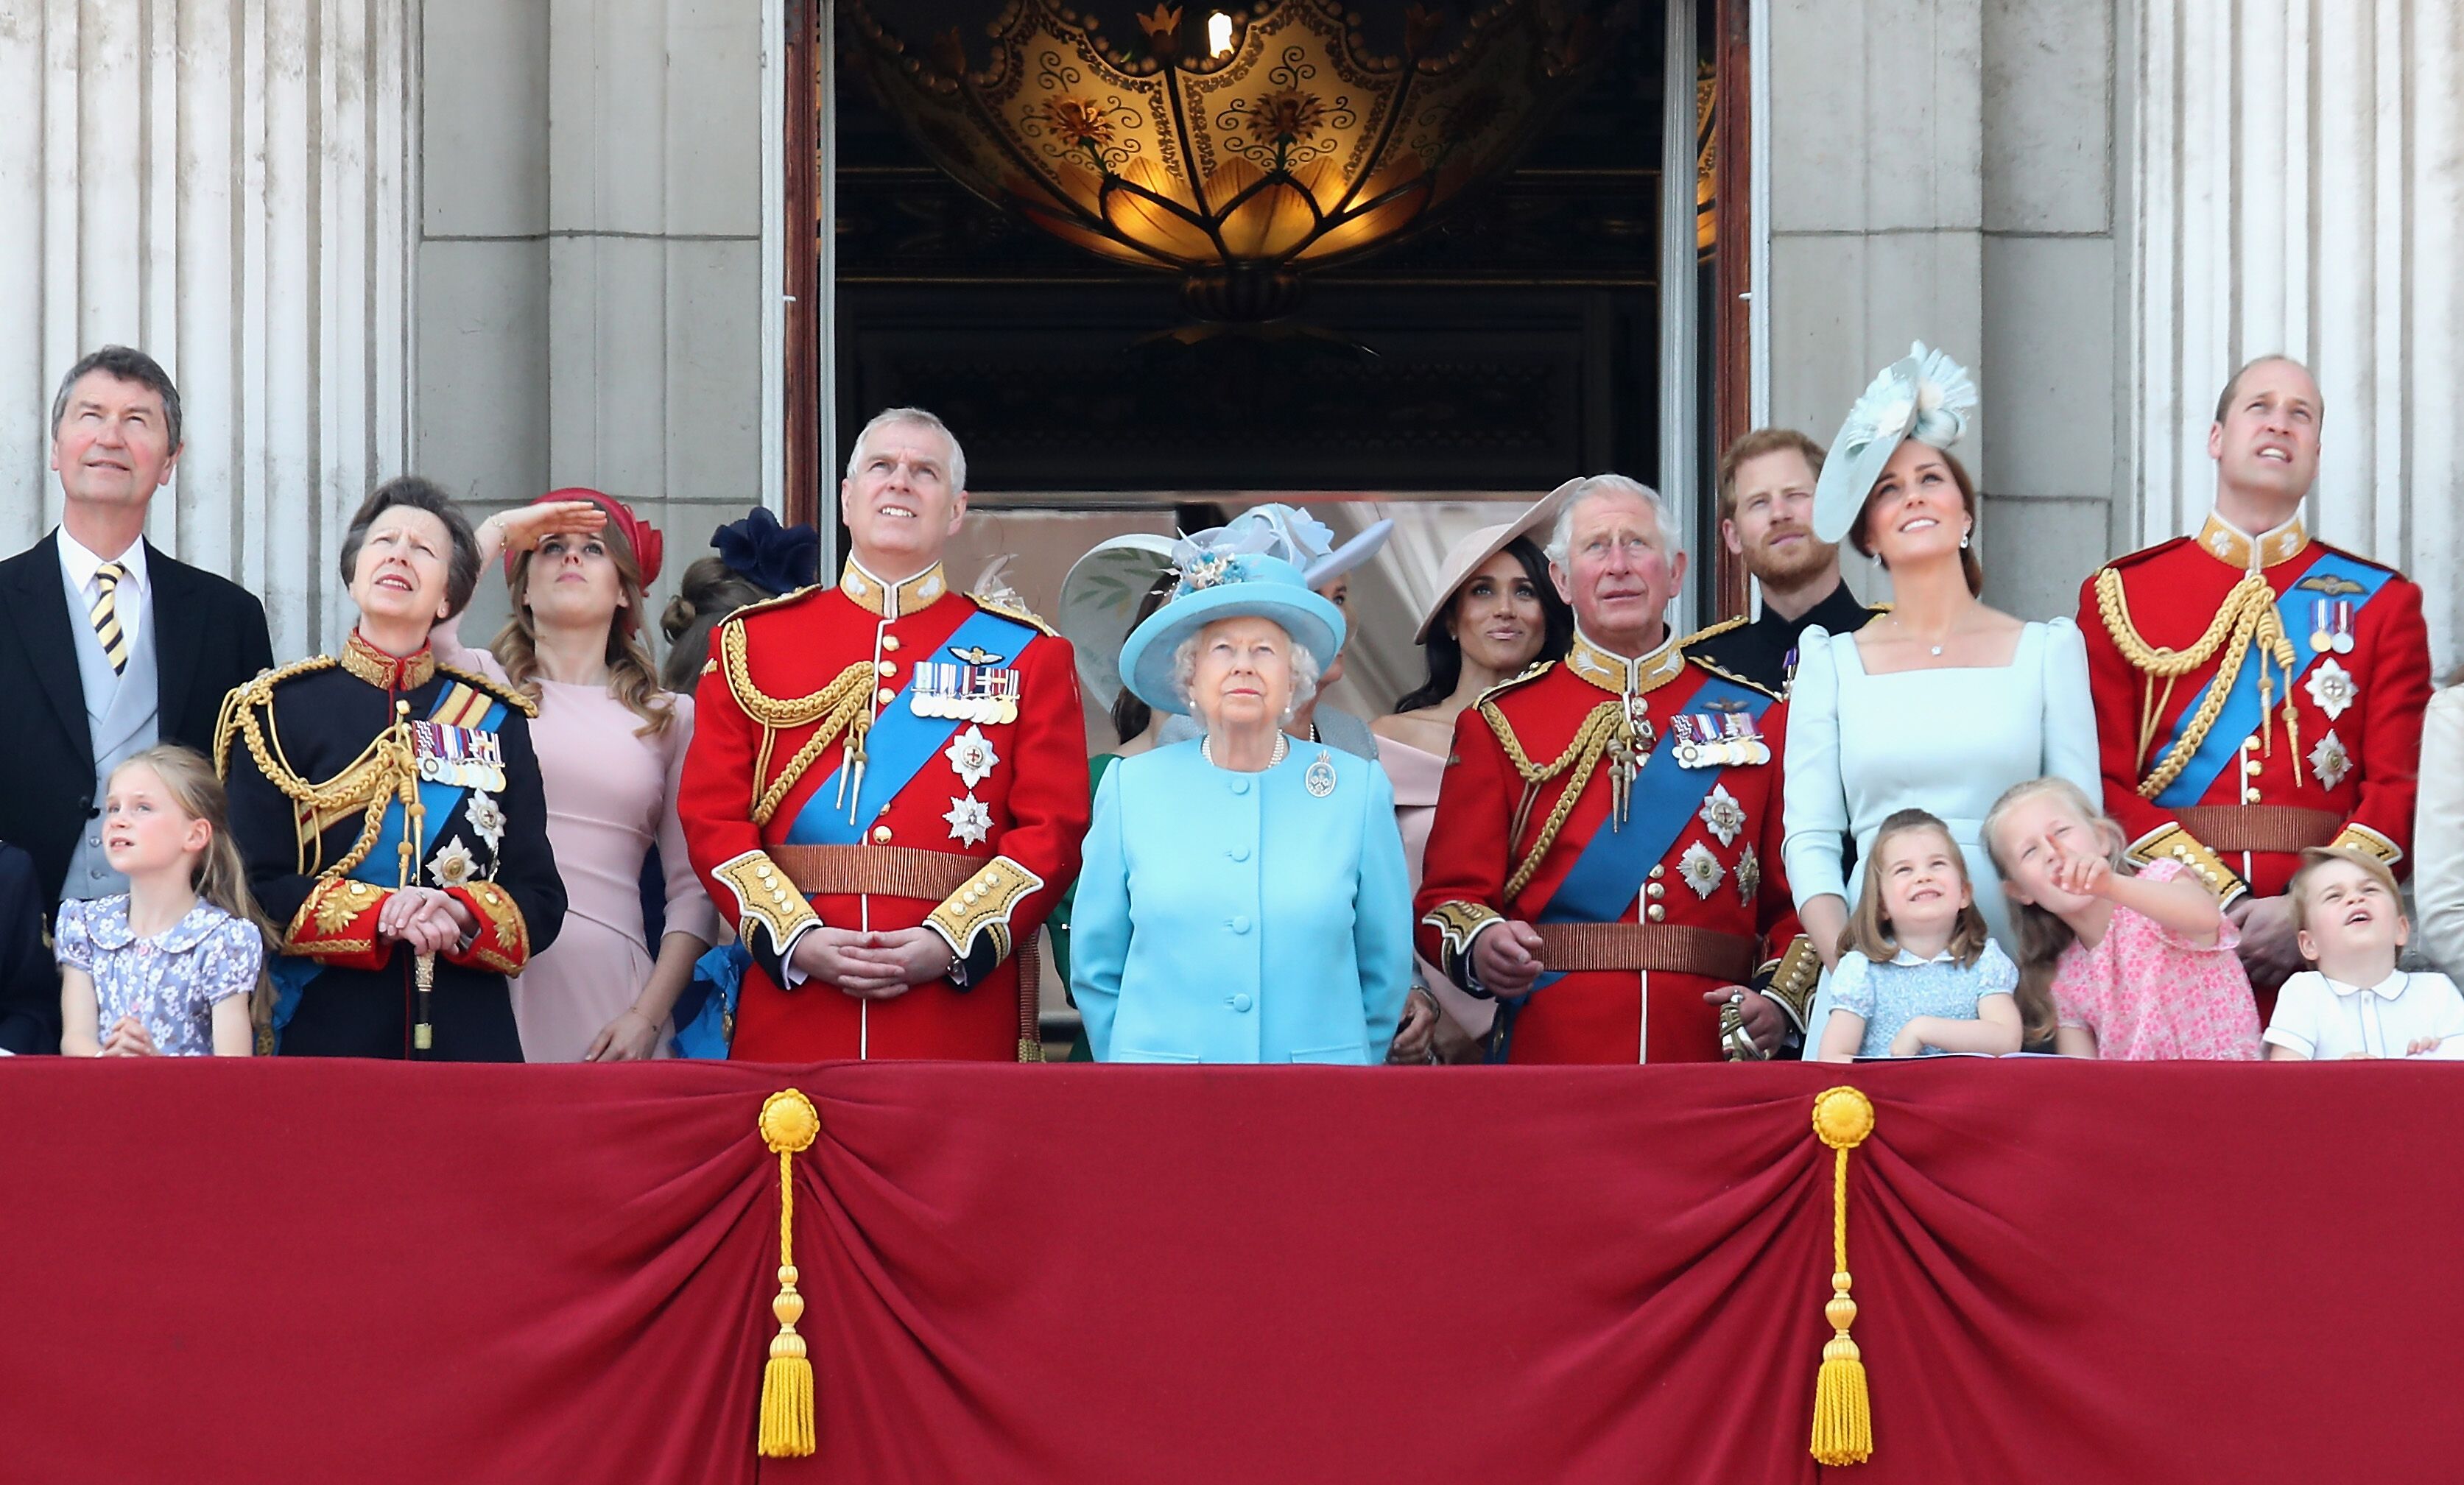 Princess Anne, Princess Royal, Princess Beatrice, Lady Louise Windsor, Prince Andrew, Duke of York, Queen Elizabeth II, Meghan, Duchess of Sussex, Prince Charles, Prince of Wales, Prince Harry, Duke of Sussex, Catherine, Duchess of Cambridge, Prince William, Duke of Cambridge, Princess Charlotte of Cambridge, Savannah Phillips, Prince George of Cambridge and Isla Phillips watch the flypast on the balcony of Buckingham Palace during Trooping The Colour. | Source: Getty Images